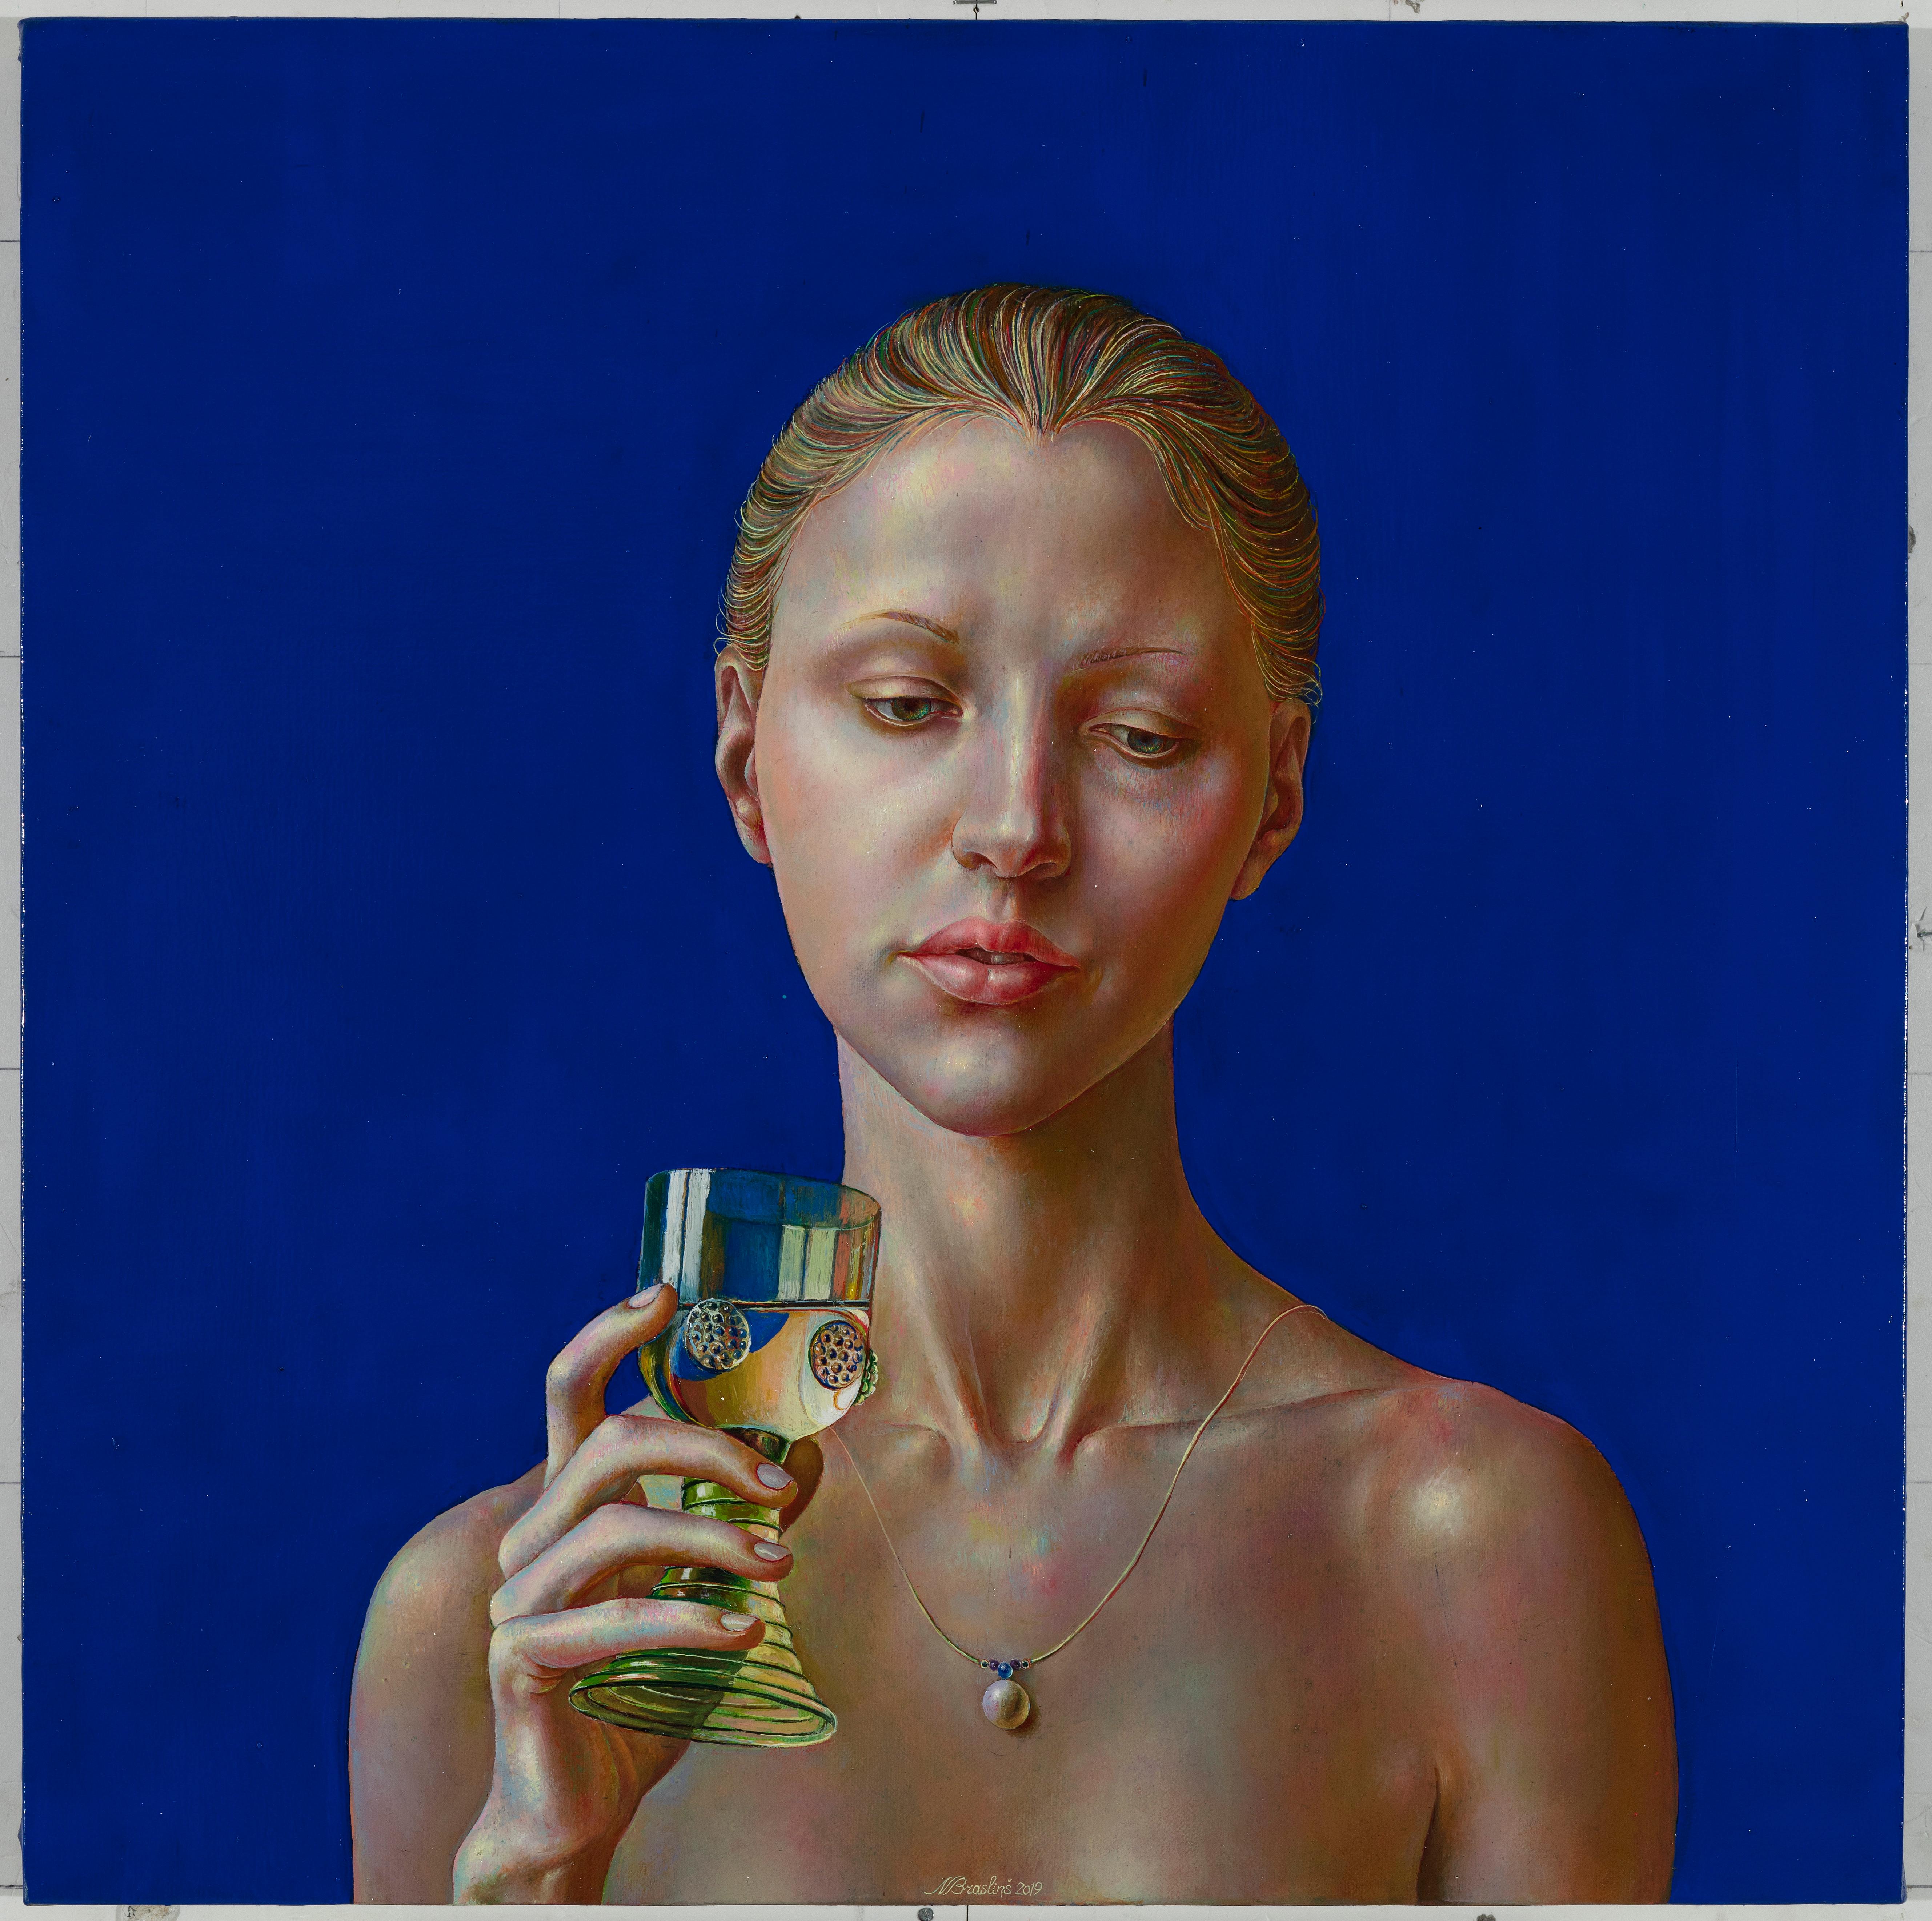 Normunds Braslinsh Nude Painting - Woman with a glass.2019. Oil on canvas, 45x45 cm